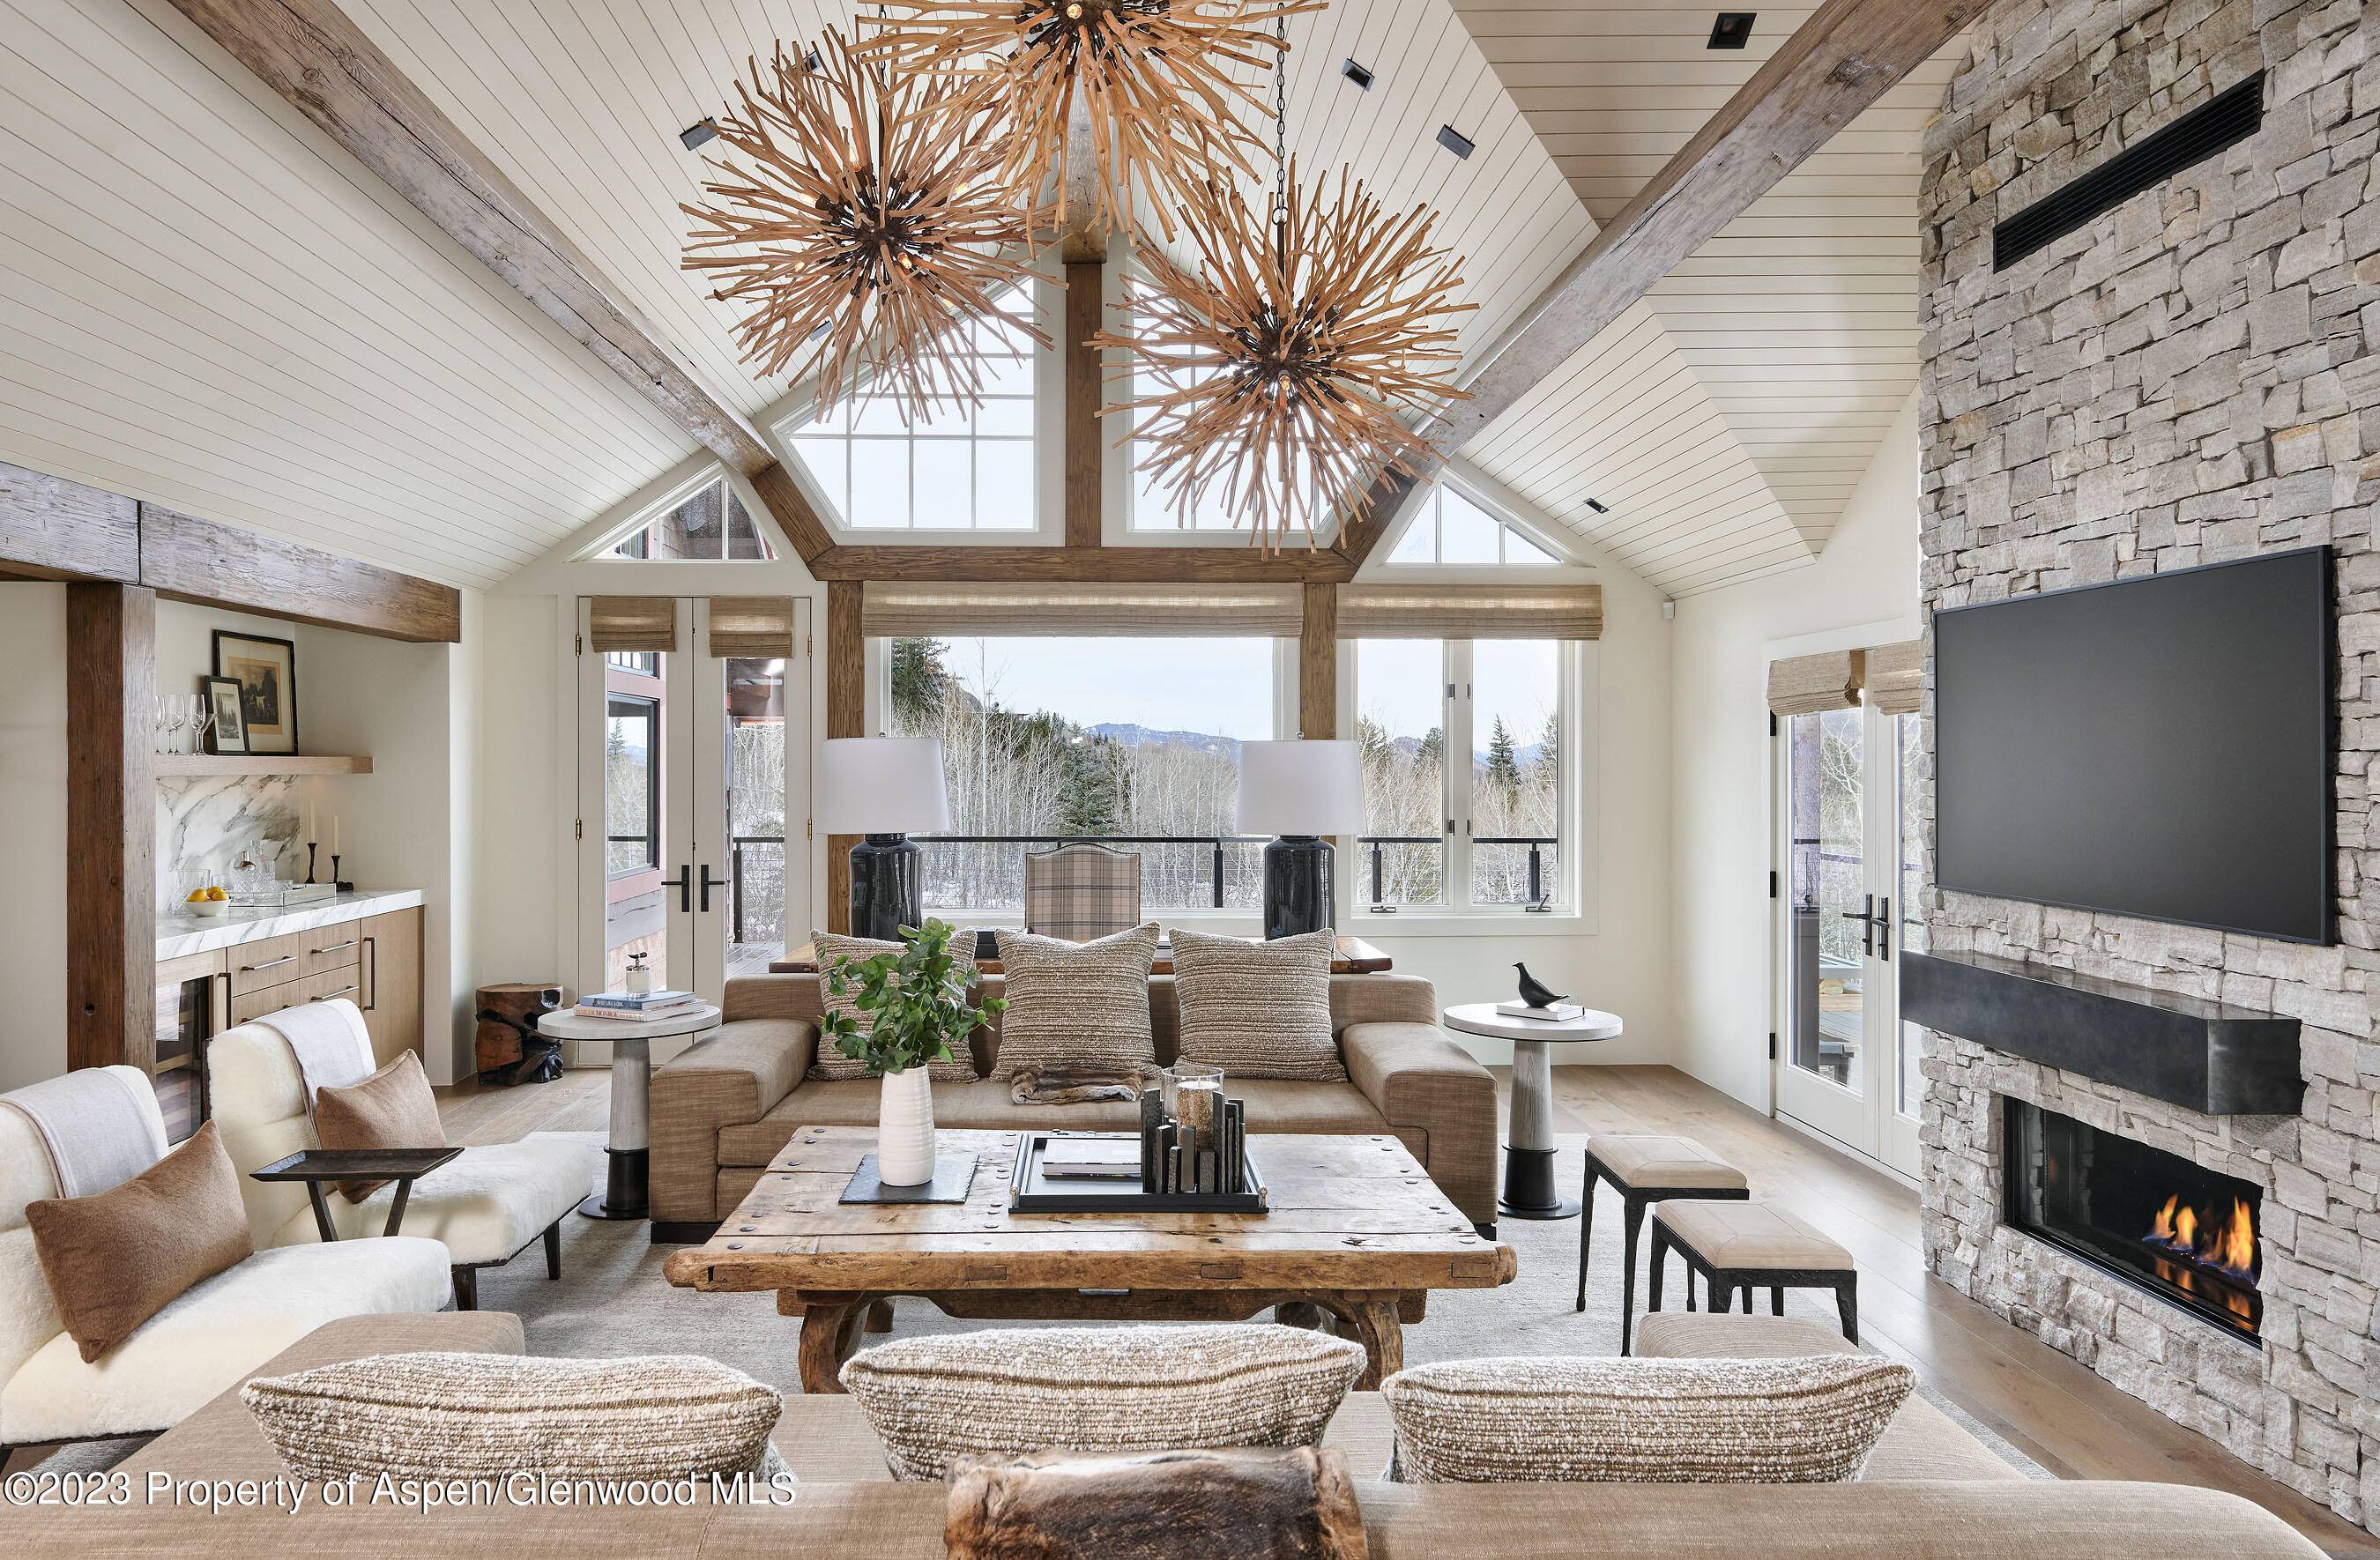 This is chic mountain luxury on one of the best avenues in Aspen.